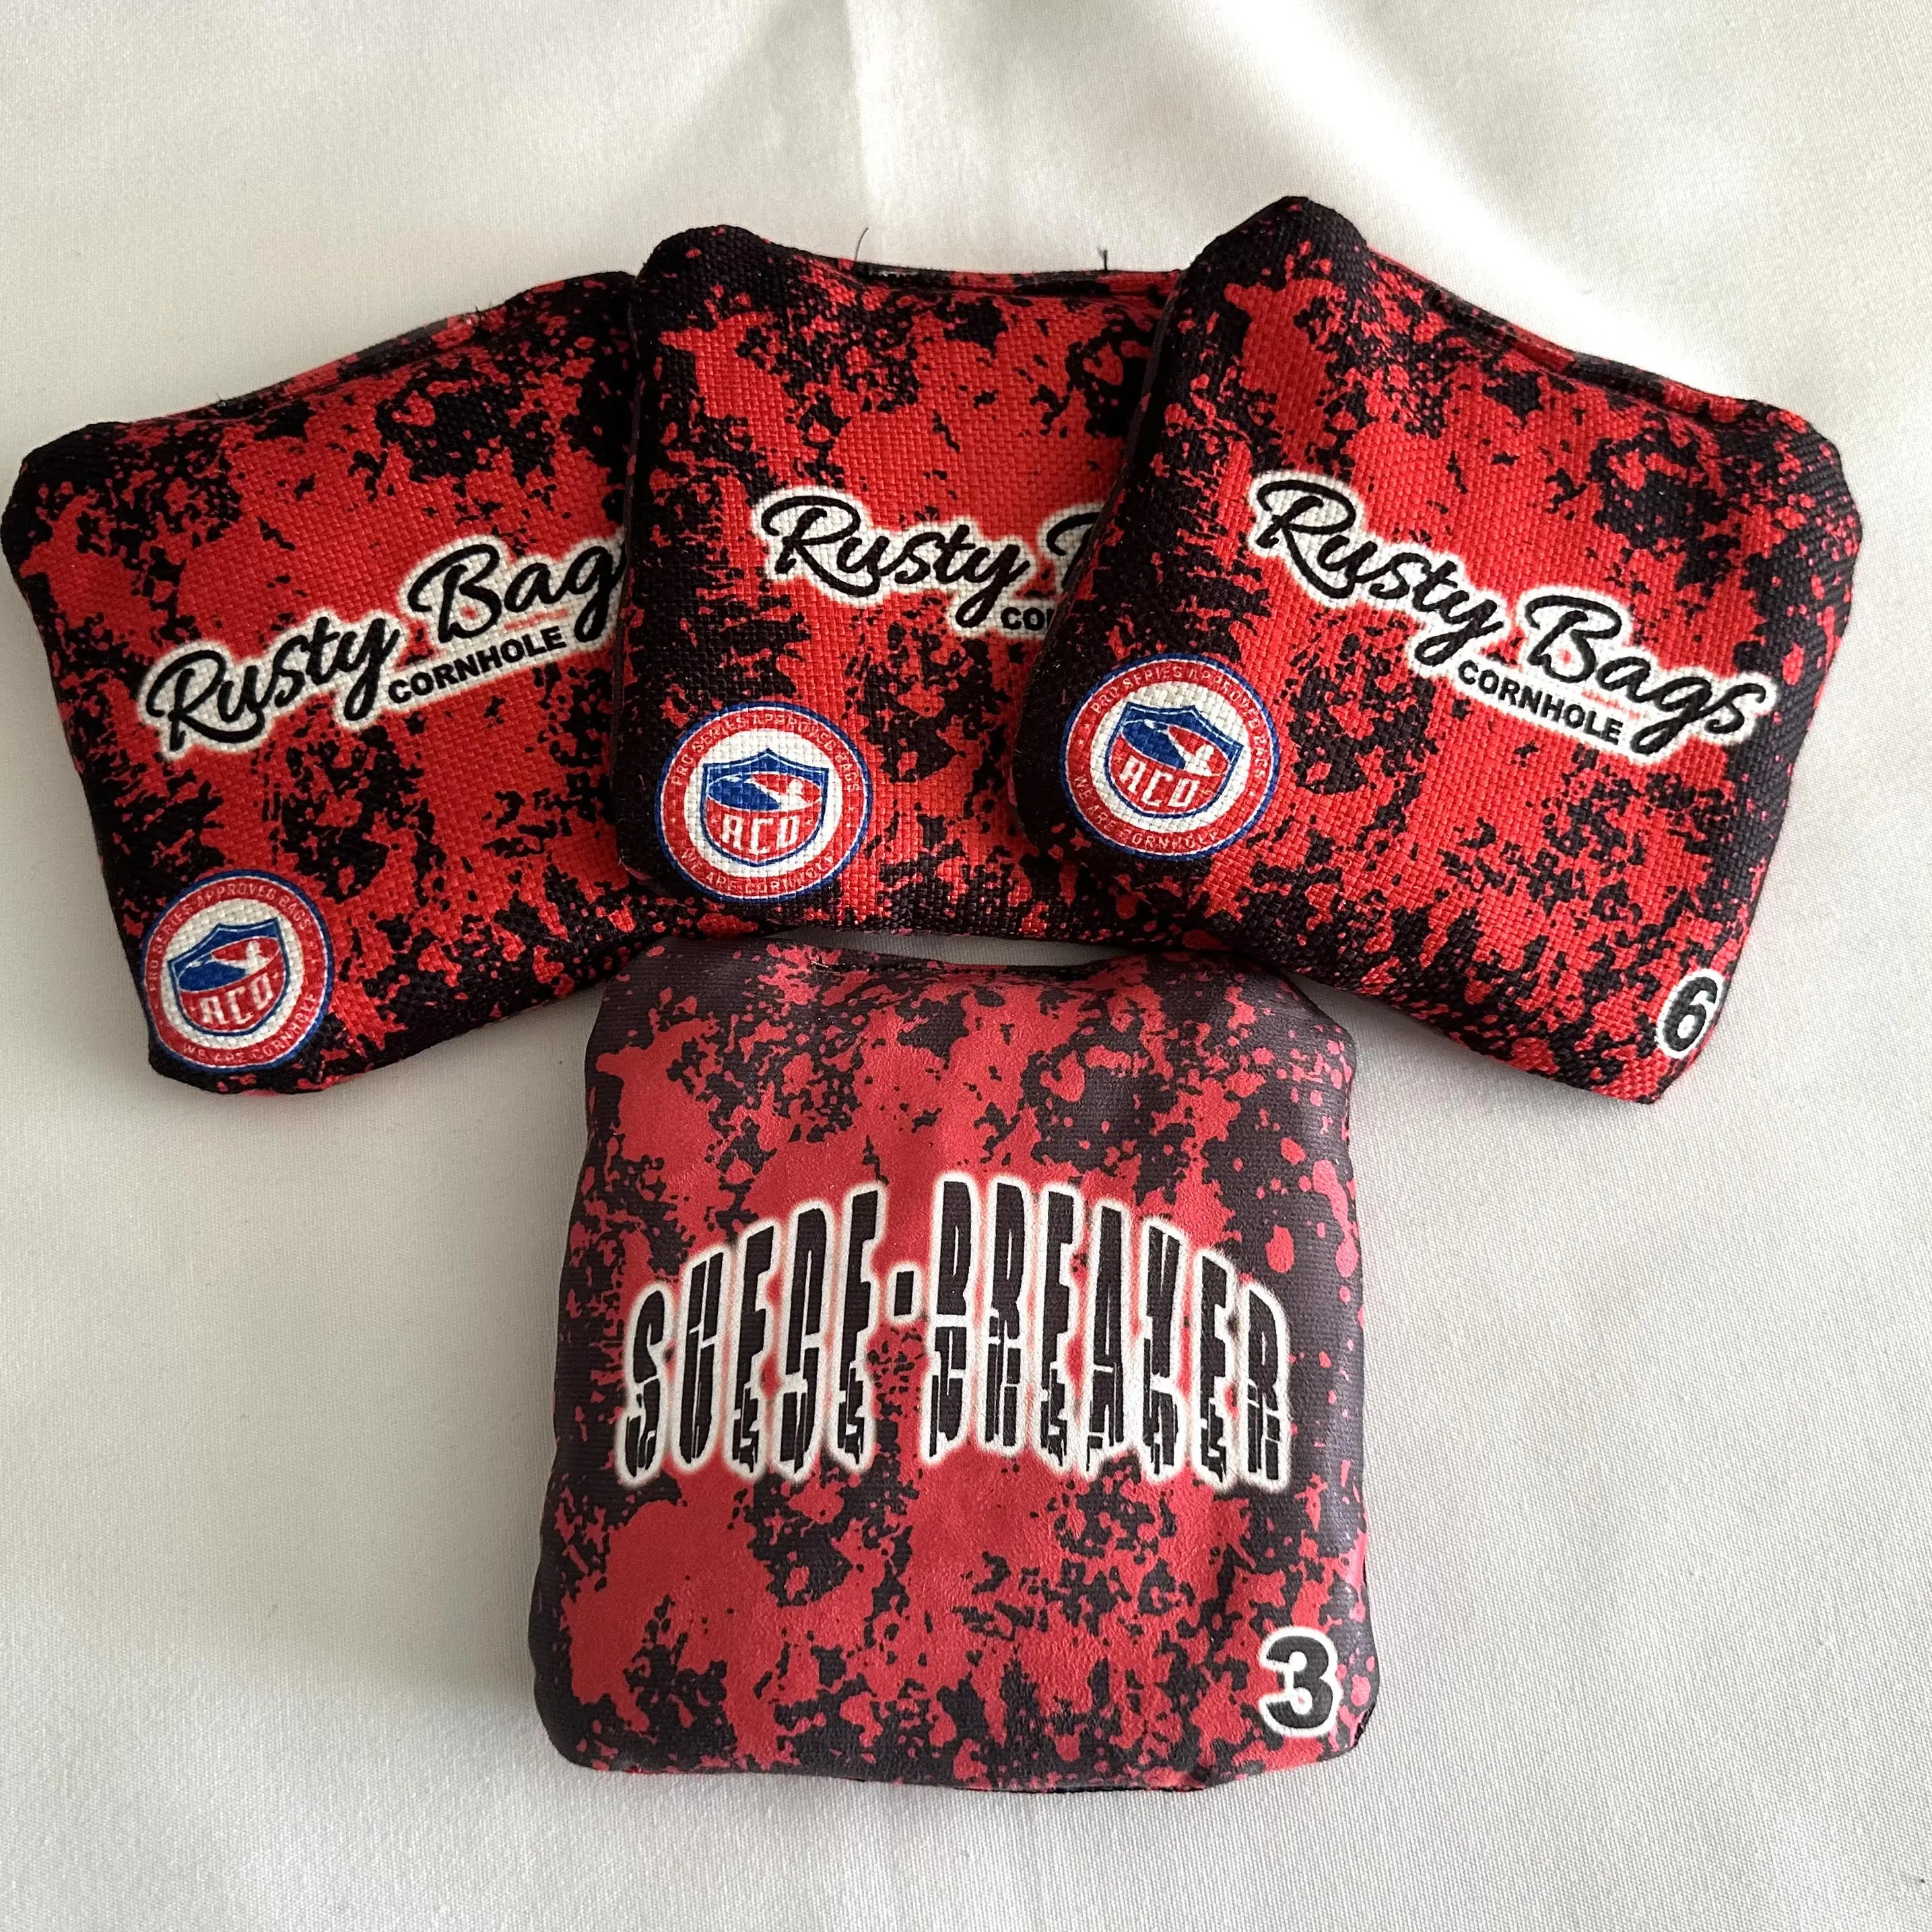 ACO Approved: Suede Breakers Speed 3/6 - Set of 4 Cornhole Bags KT Cornhole Wraps and Boards